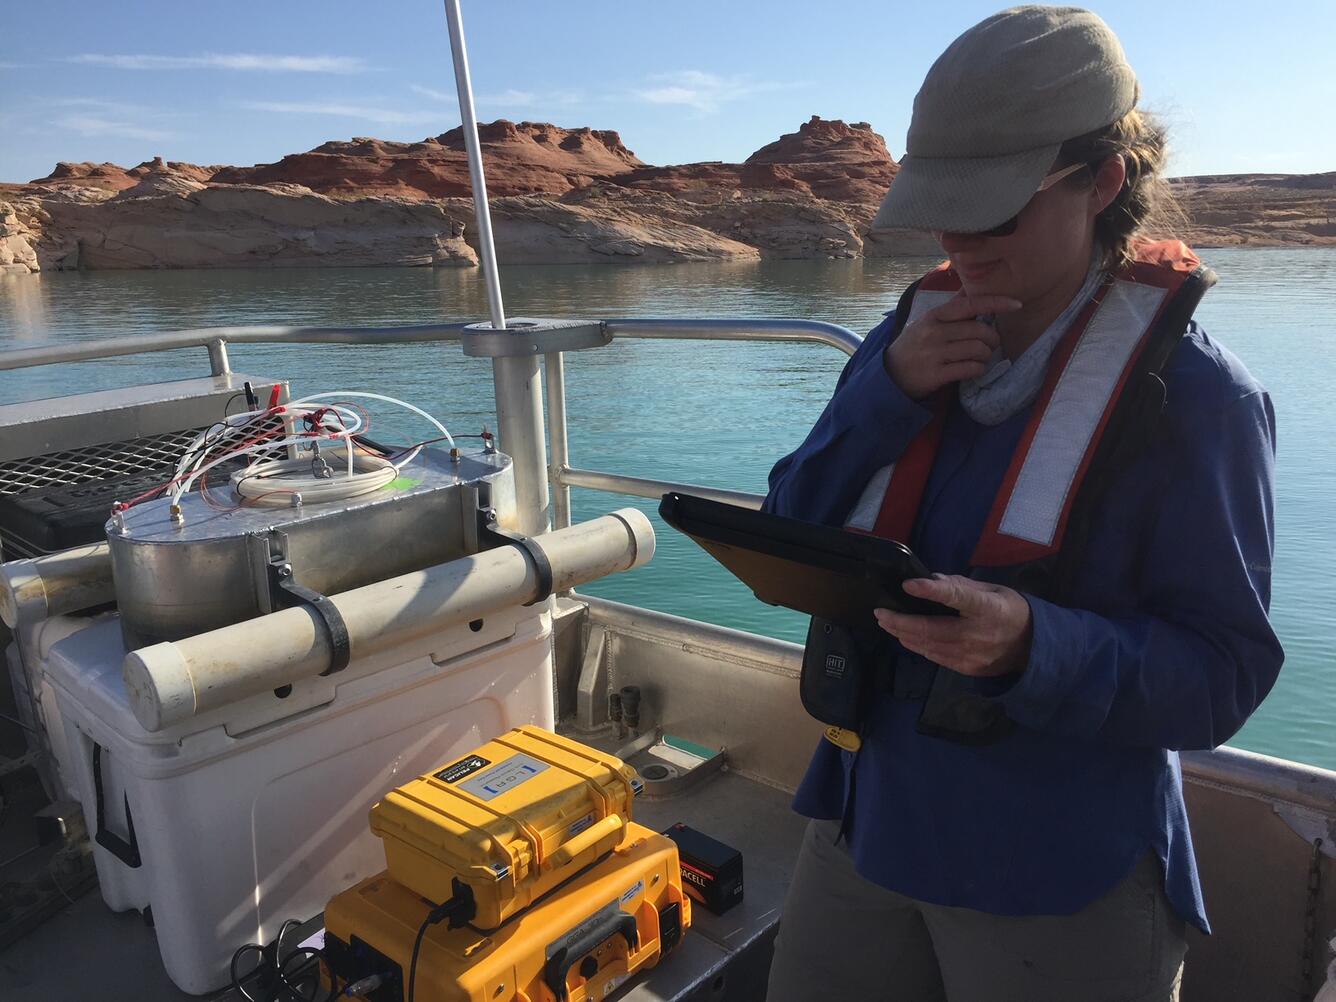 Greenhouse gas monitoring on Lake Powell using a GHG analyzer and floating chamber